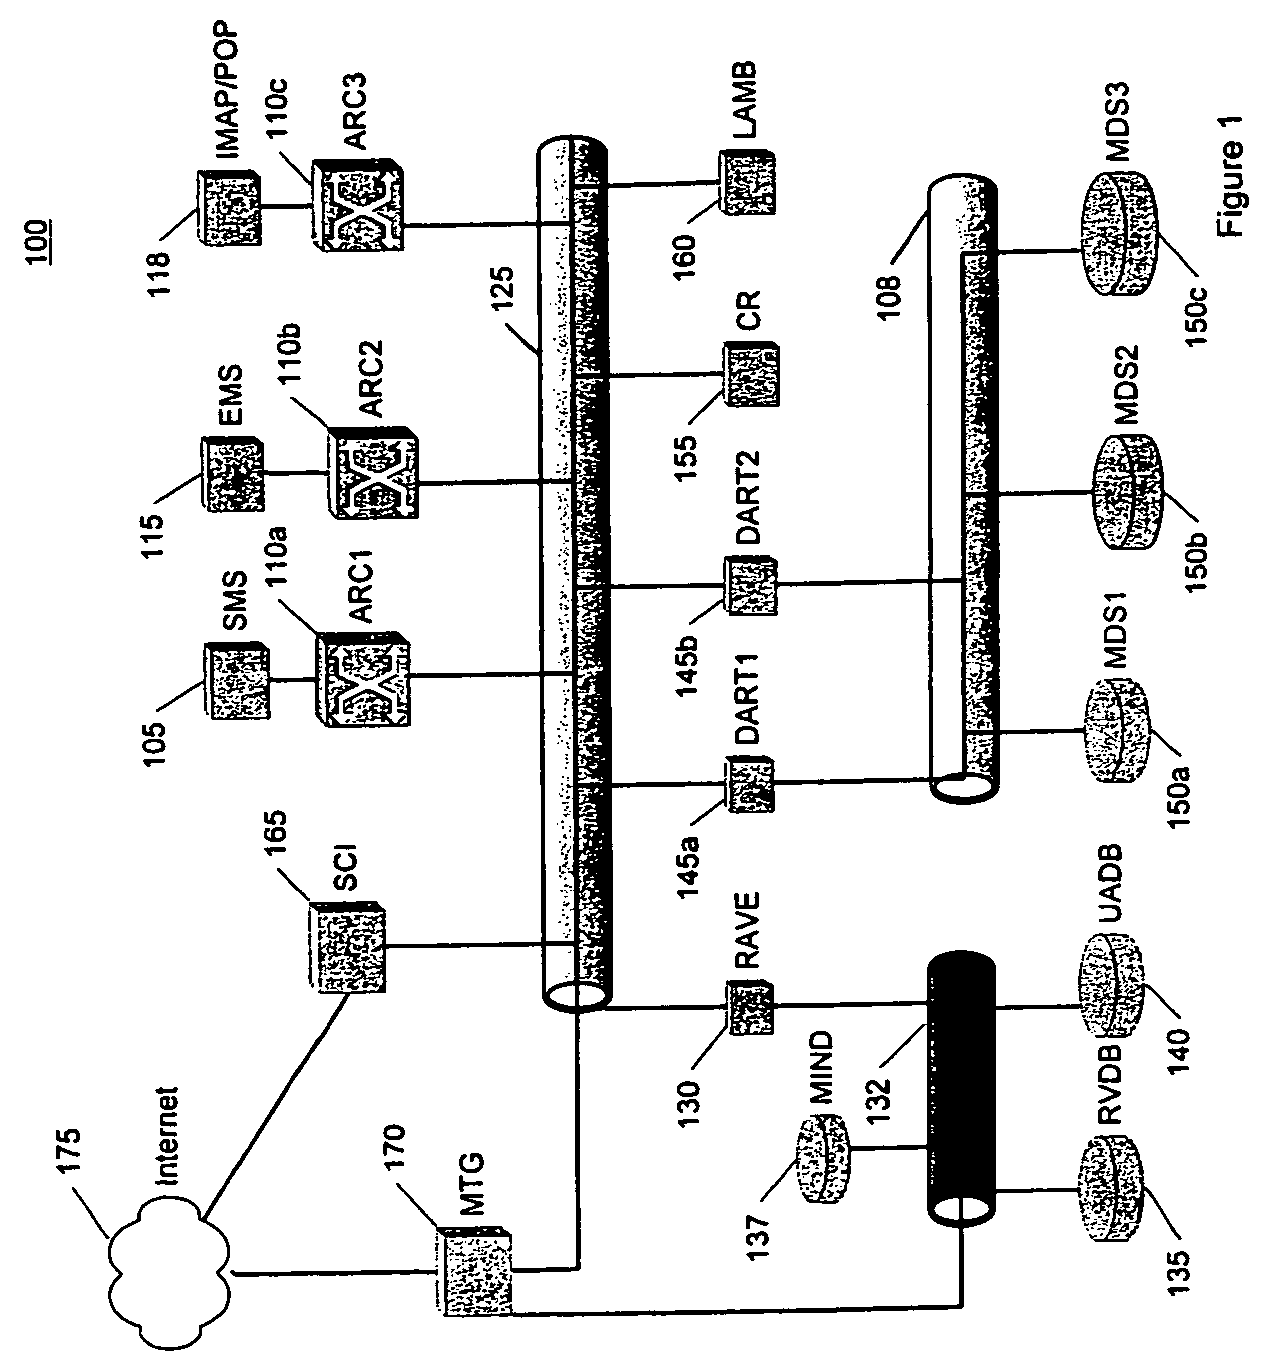 Methods and systems for routing messages through a communications network based on message content